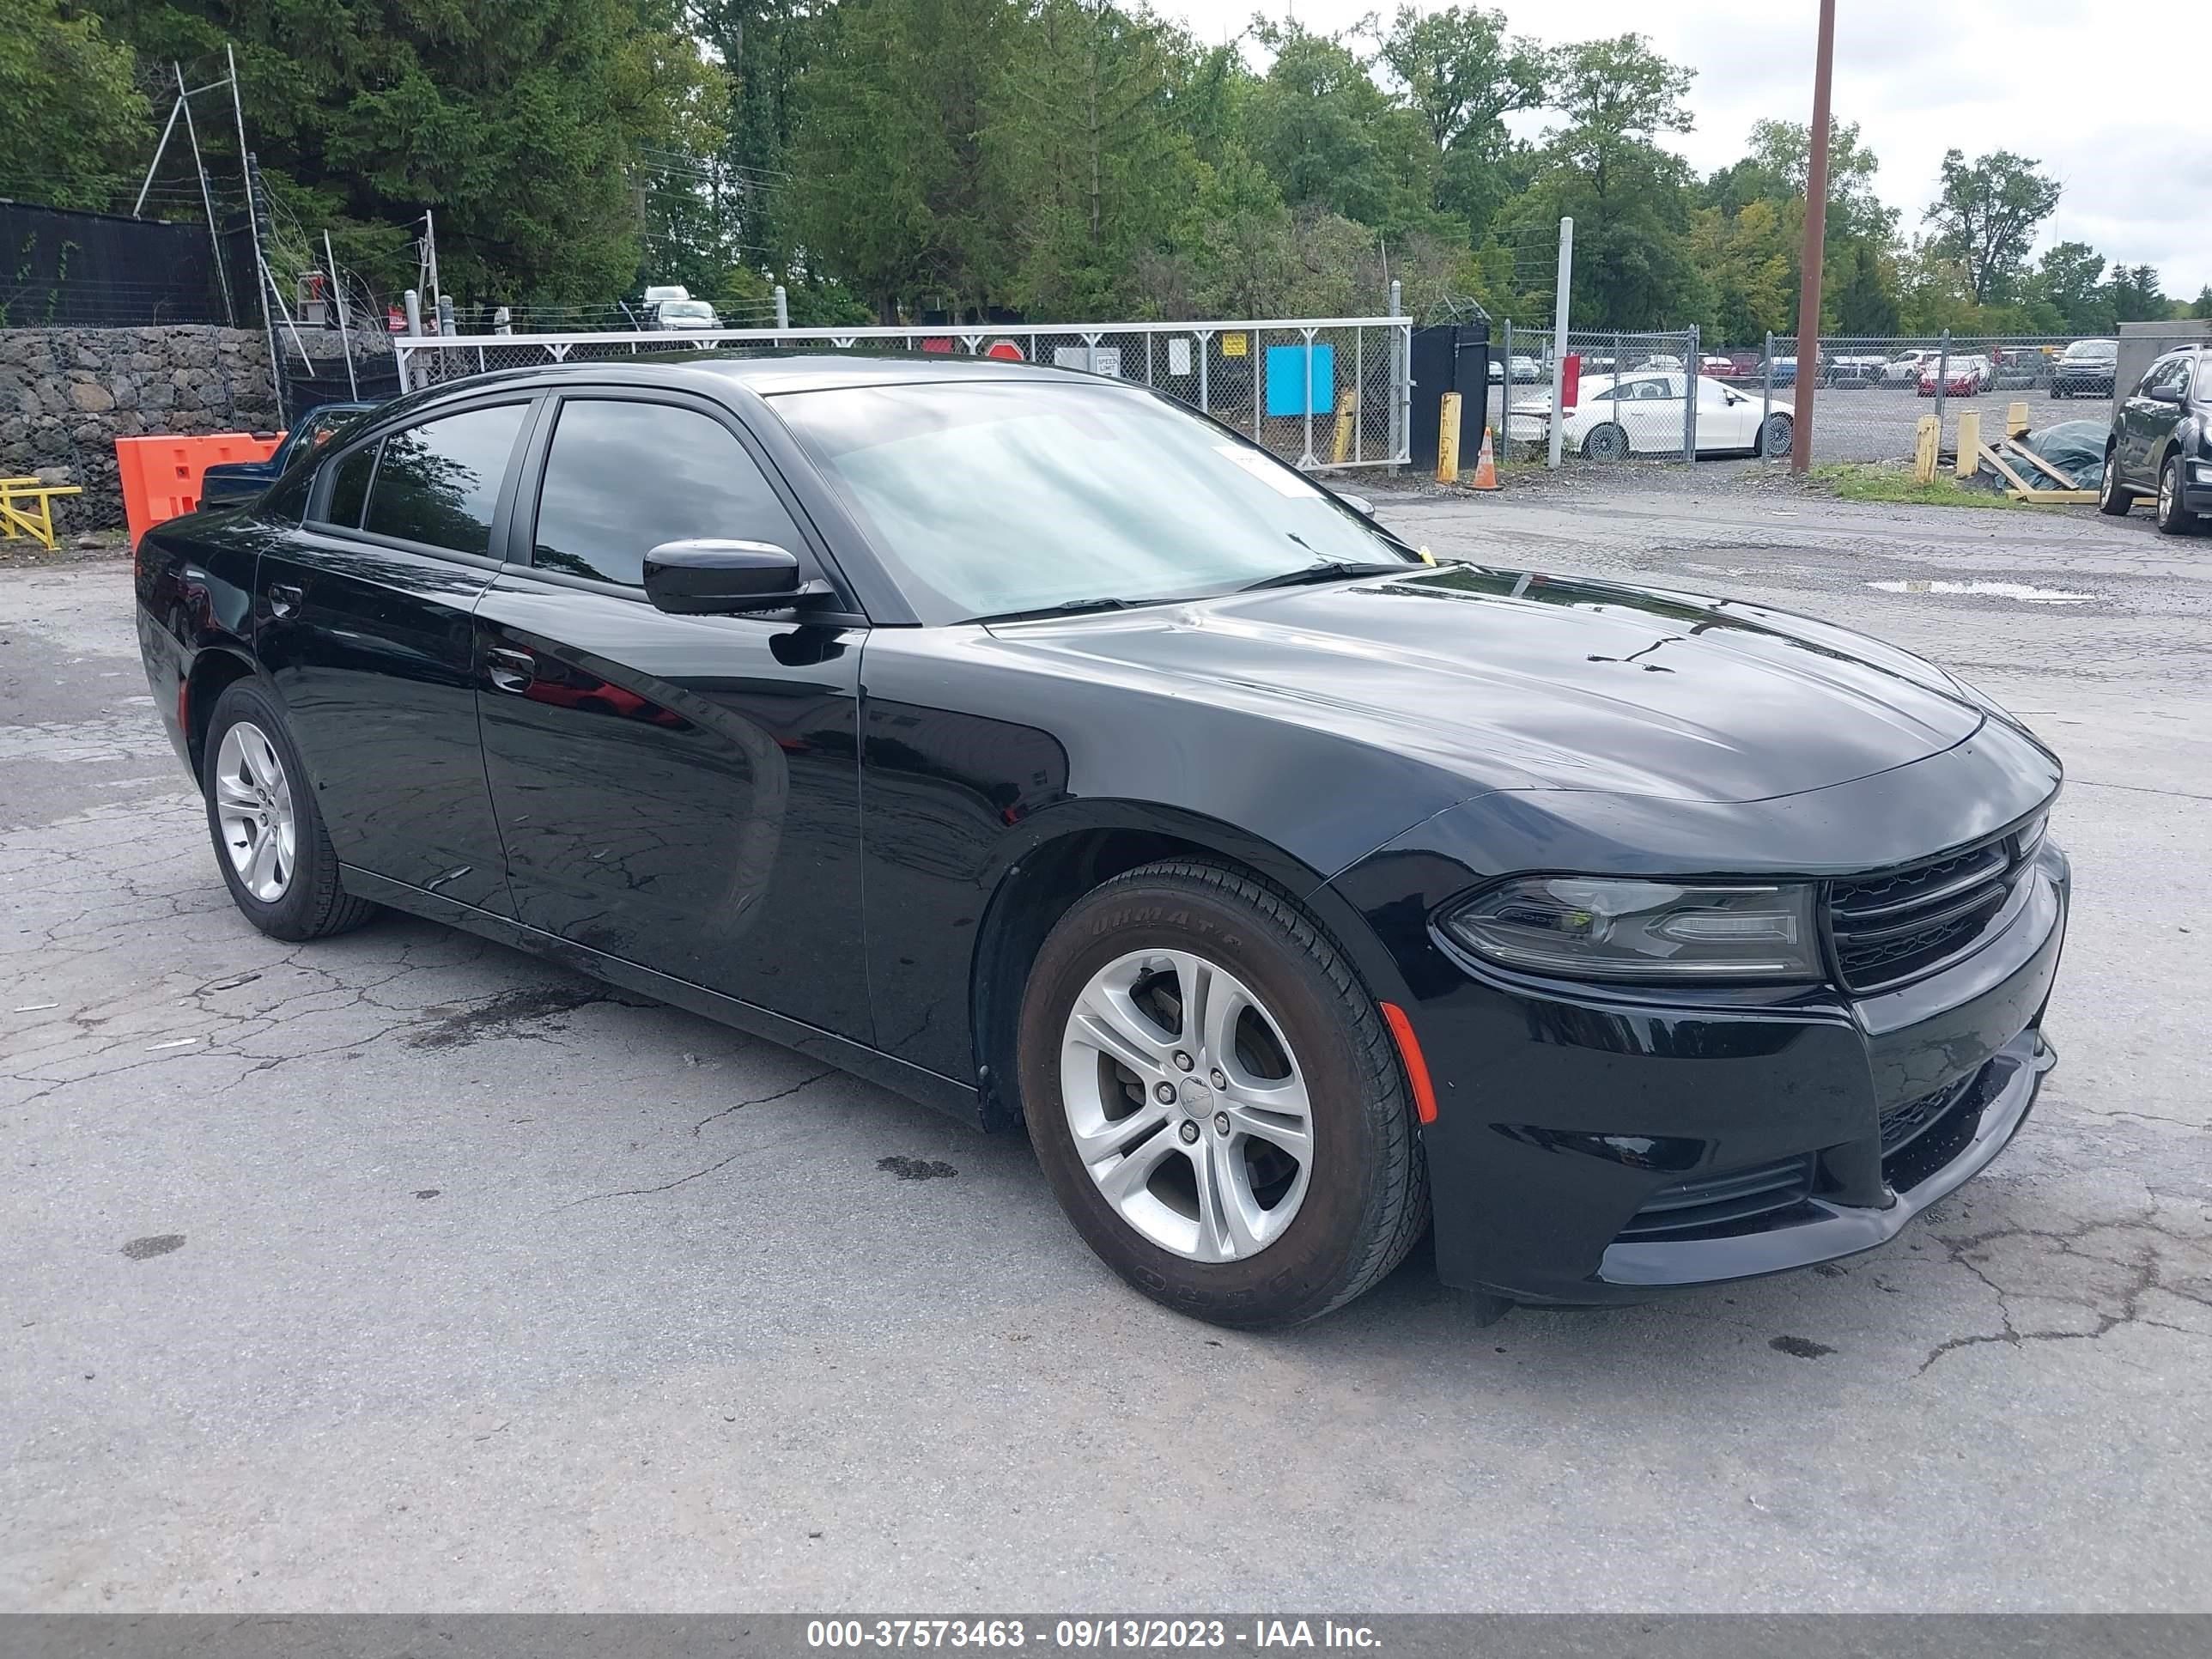 vin: 2C3CDXBG5LH165776 2C3CDXBG5LH165776 2020 dodge charger 3600 for Sale in 12575, 39 Stone Castle Rd, Rock Tavern, USA